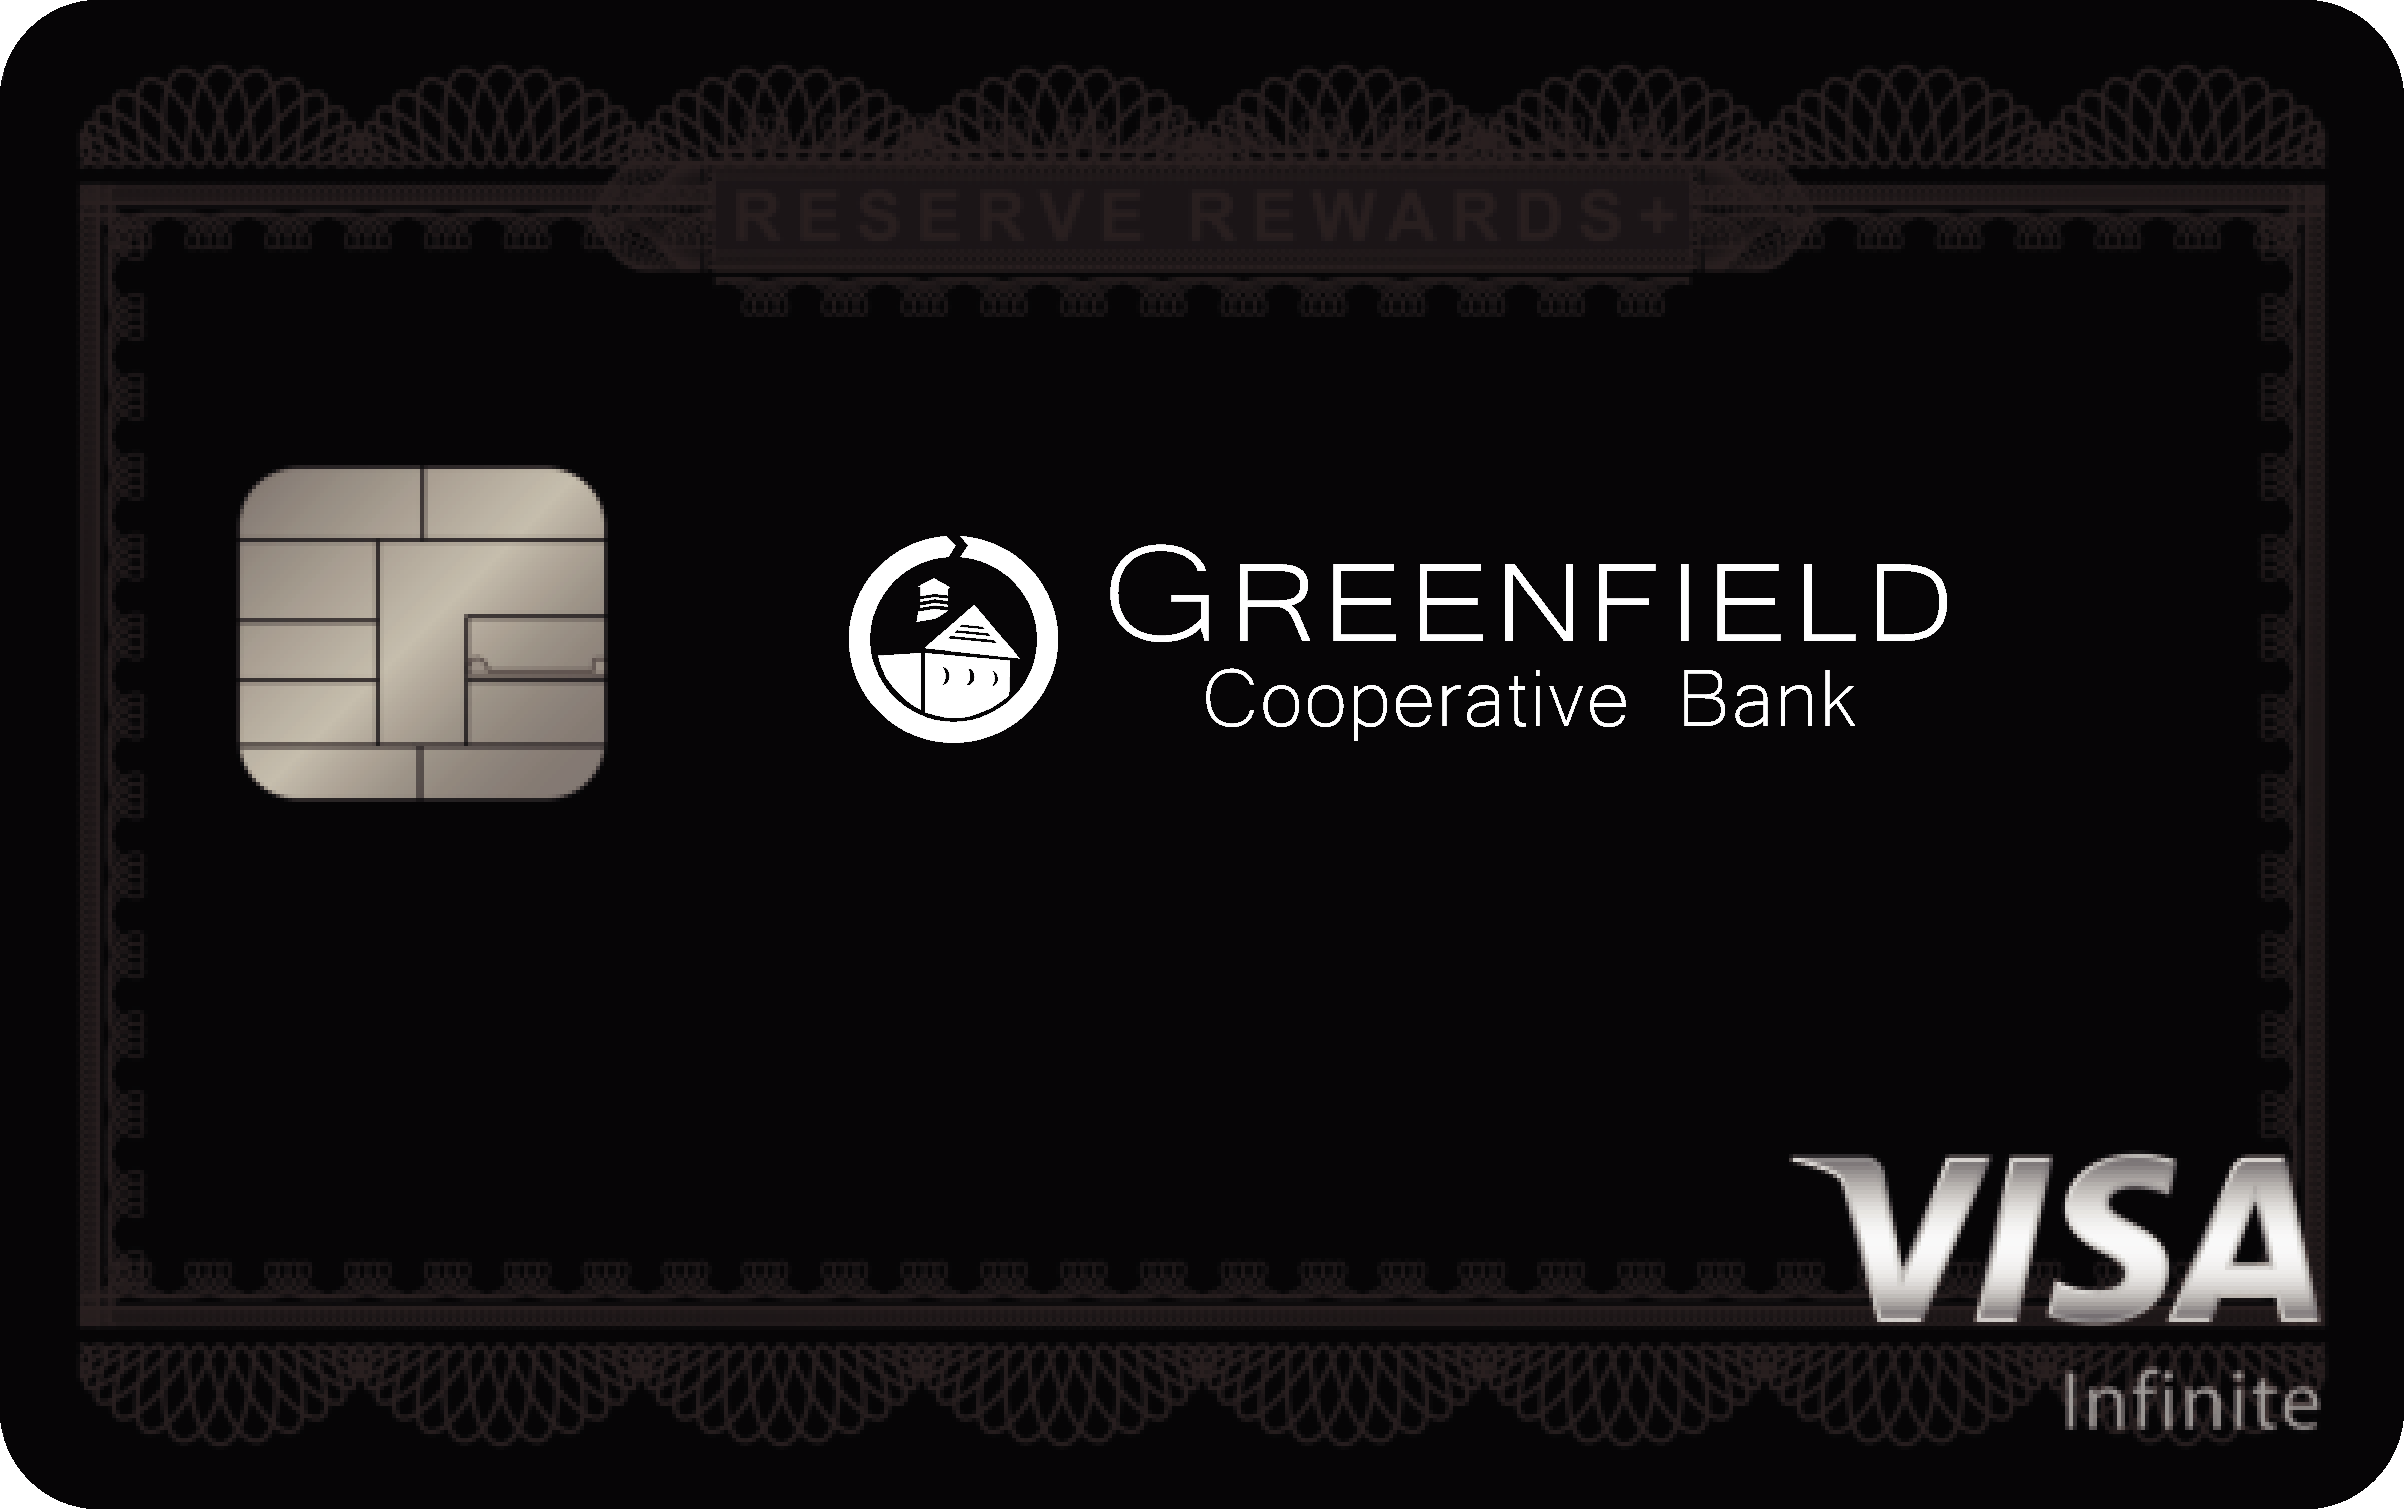 Greenfield Co-Operative Bank